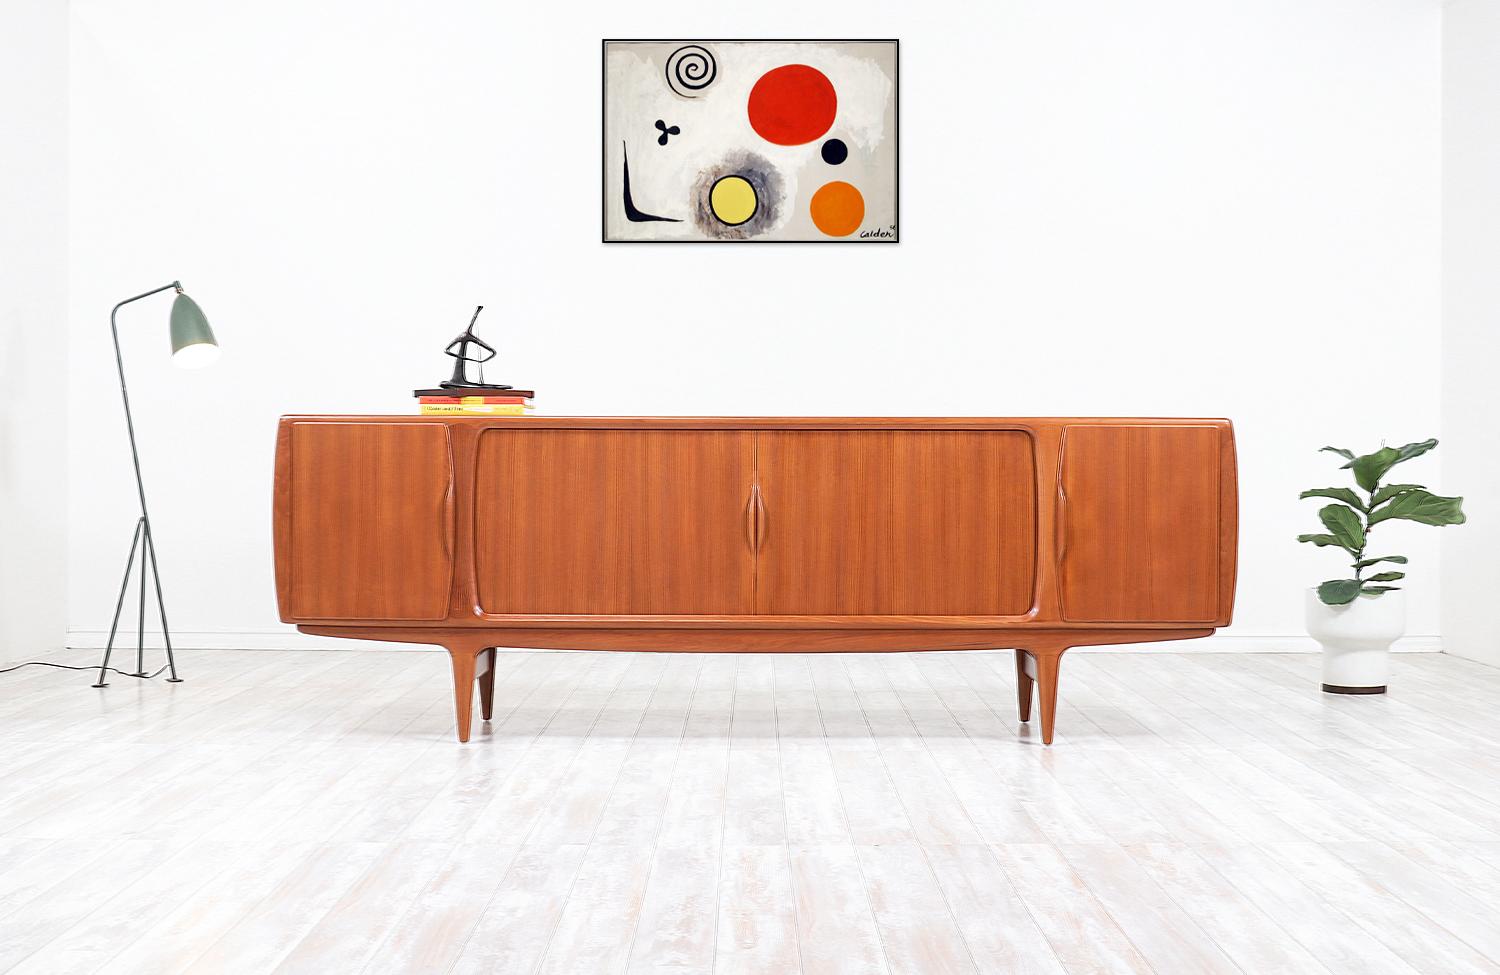 One of our most monumental and skillfully crafted credenzas by Danish designer, Johannes Andersen in collaboration with Uldum Møbelfabrik in Denmark, circa 1960s. Our striking teak credenza features a flawless set of tambour-doors with sculpted